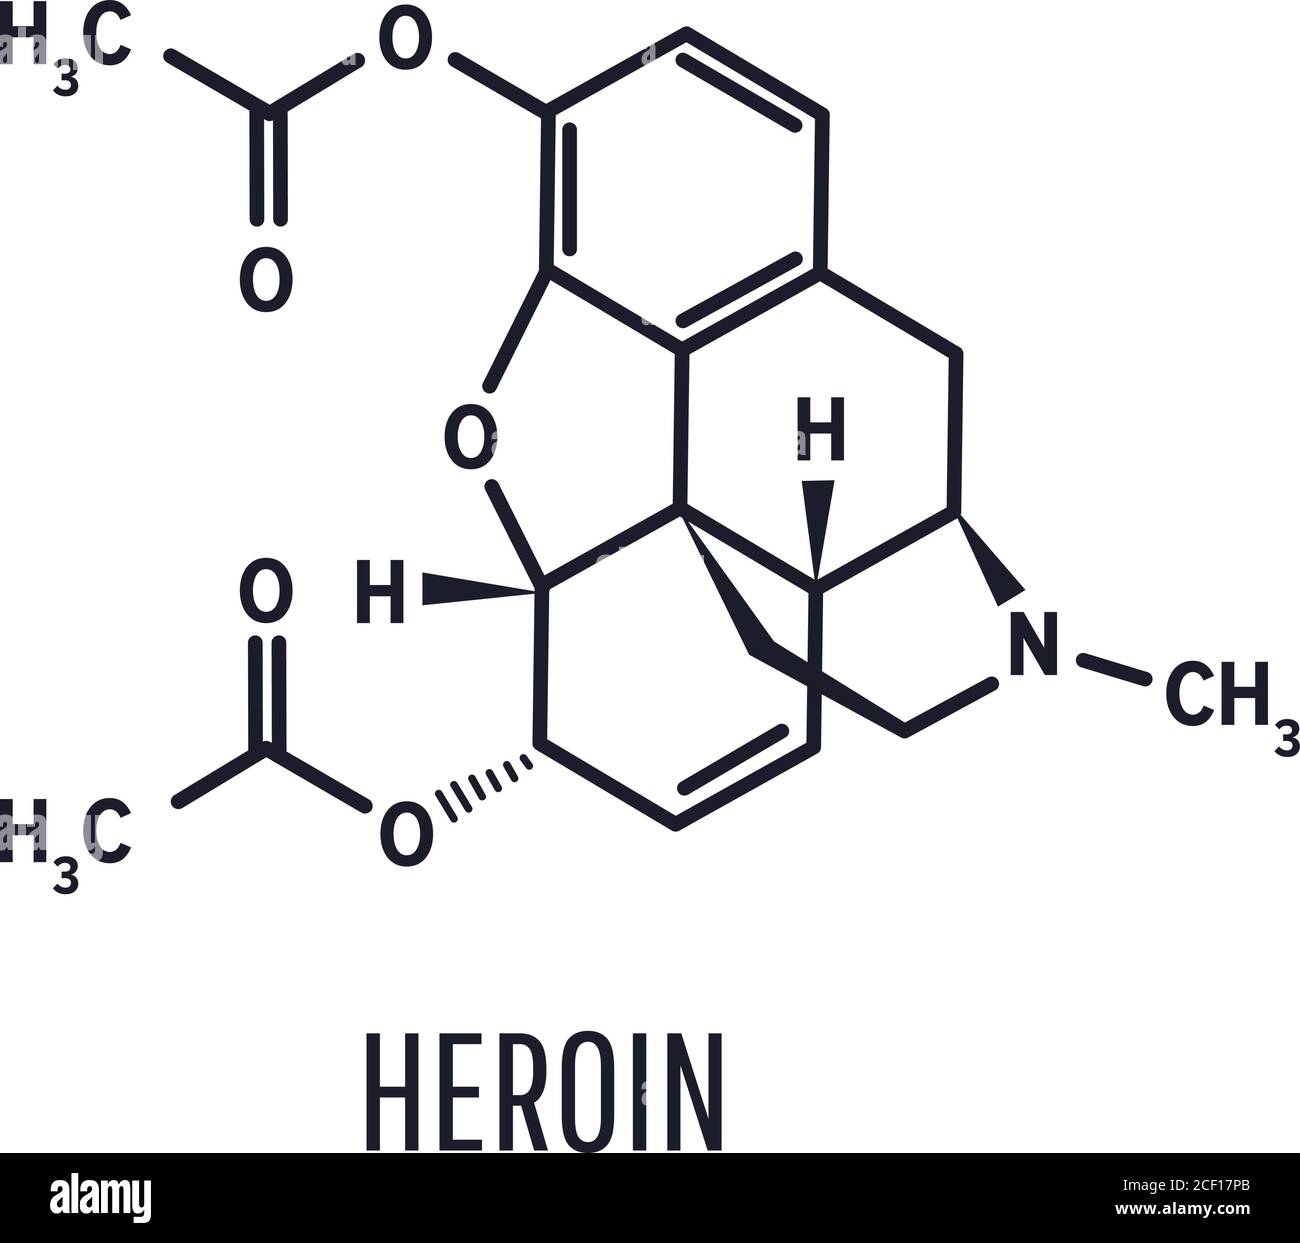 Heroin structural chemical formula on a white background Stock Vector